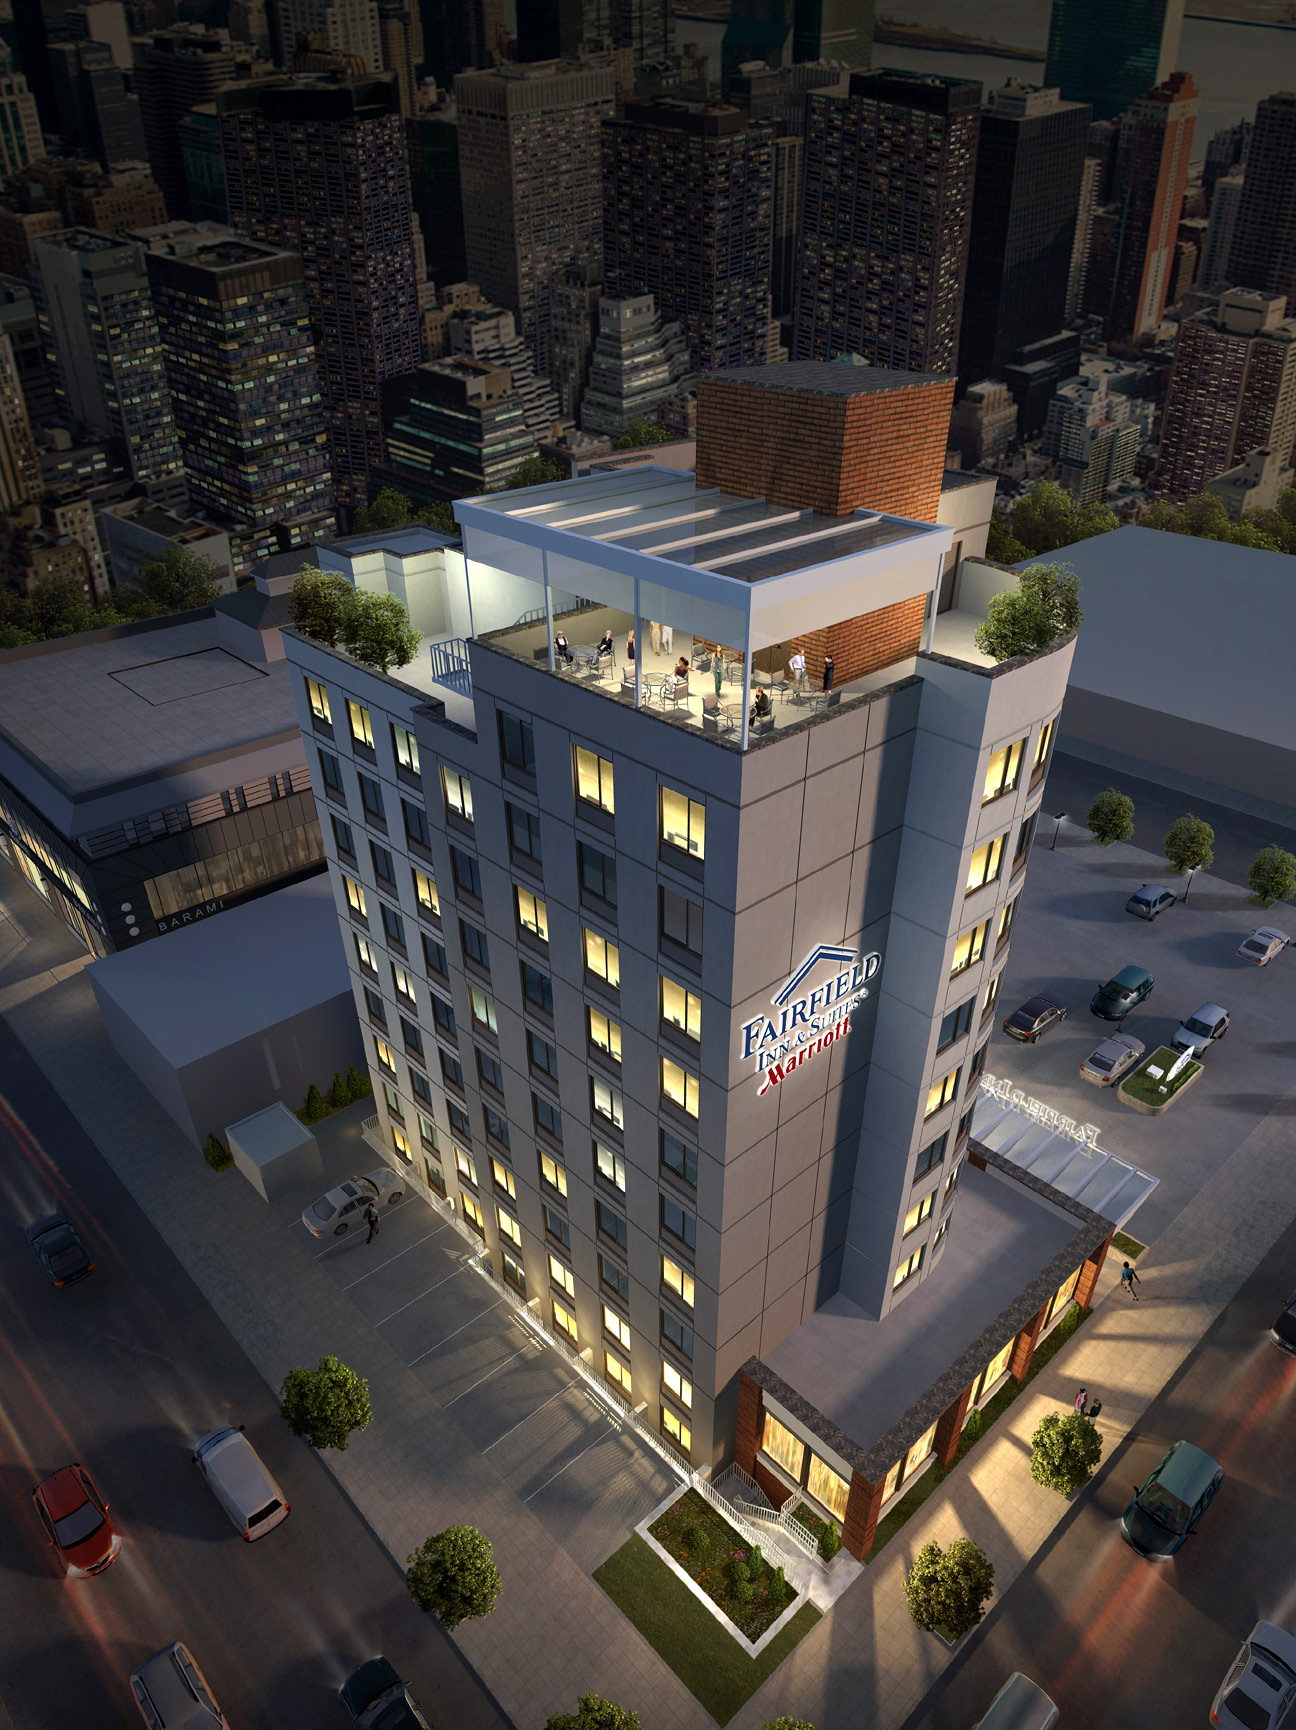 Fairfield Inn and Suites Marriott Brooklyn finds niche with